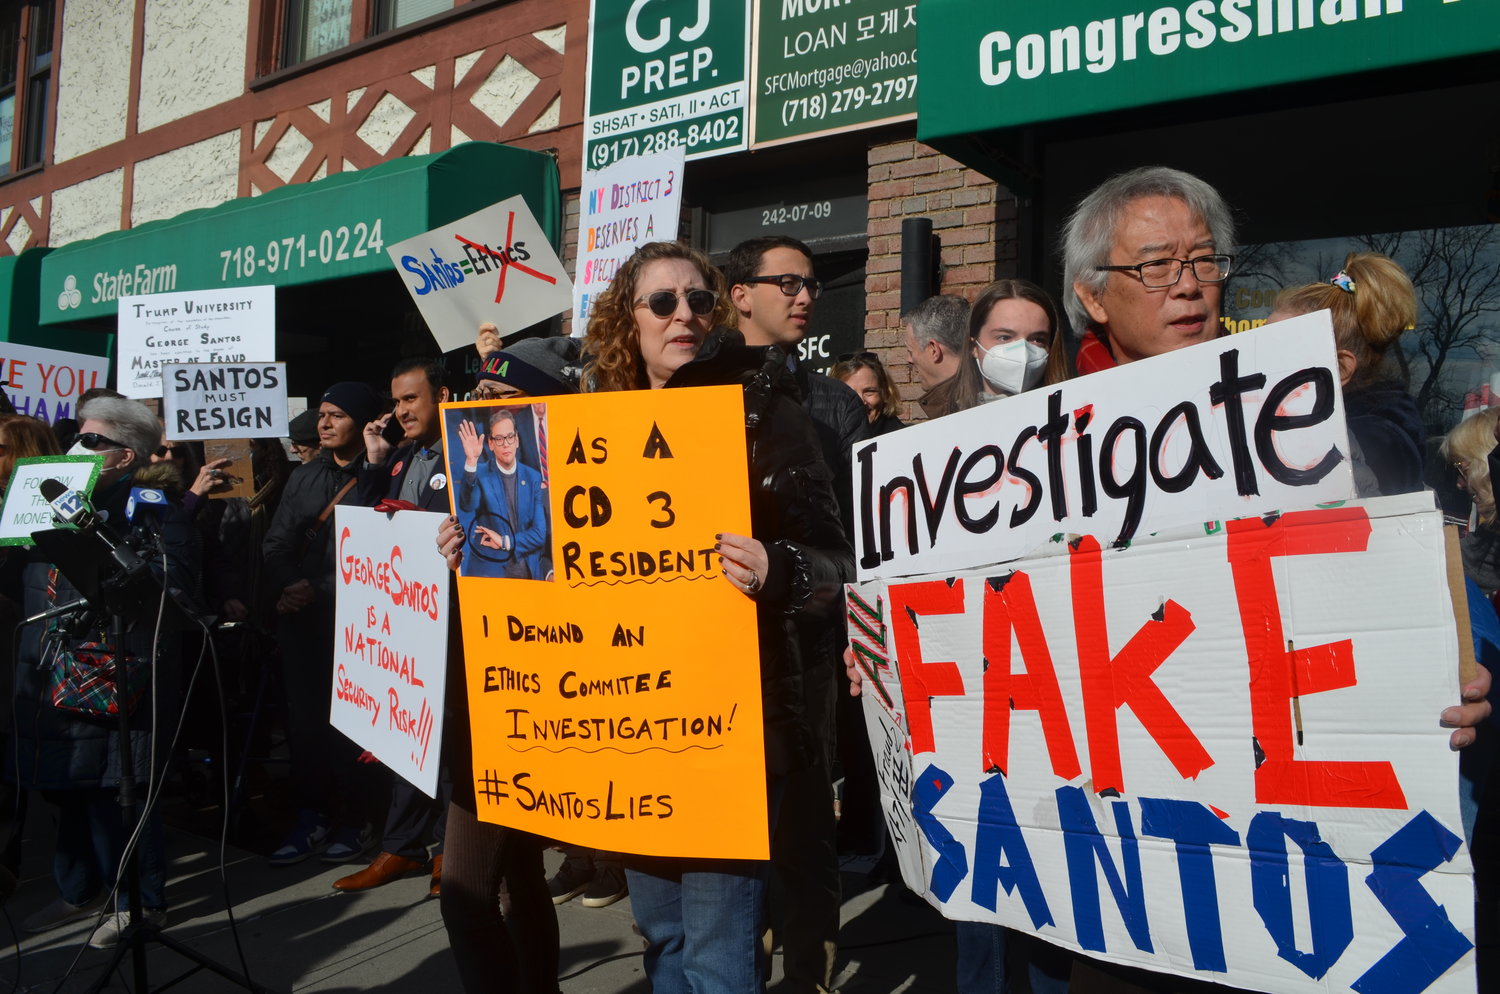 Community members of New York’s 3rd Congressional District rallied outside of U.S. Rep. George Santos’ district office in Douglaston, Queens on Jan. 7. Many showed up with handmade signs to express their disdain for the congressman.